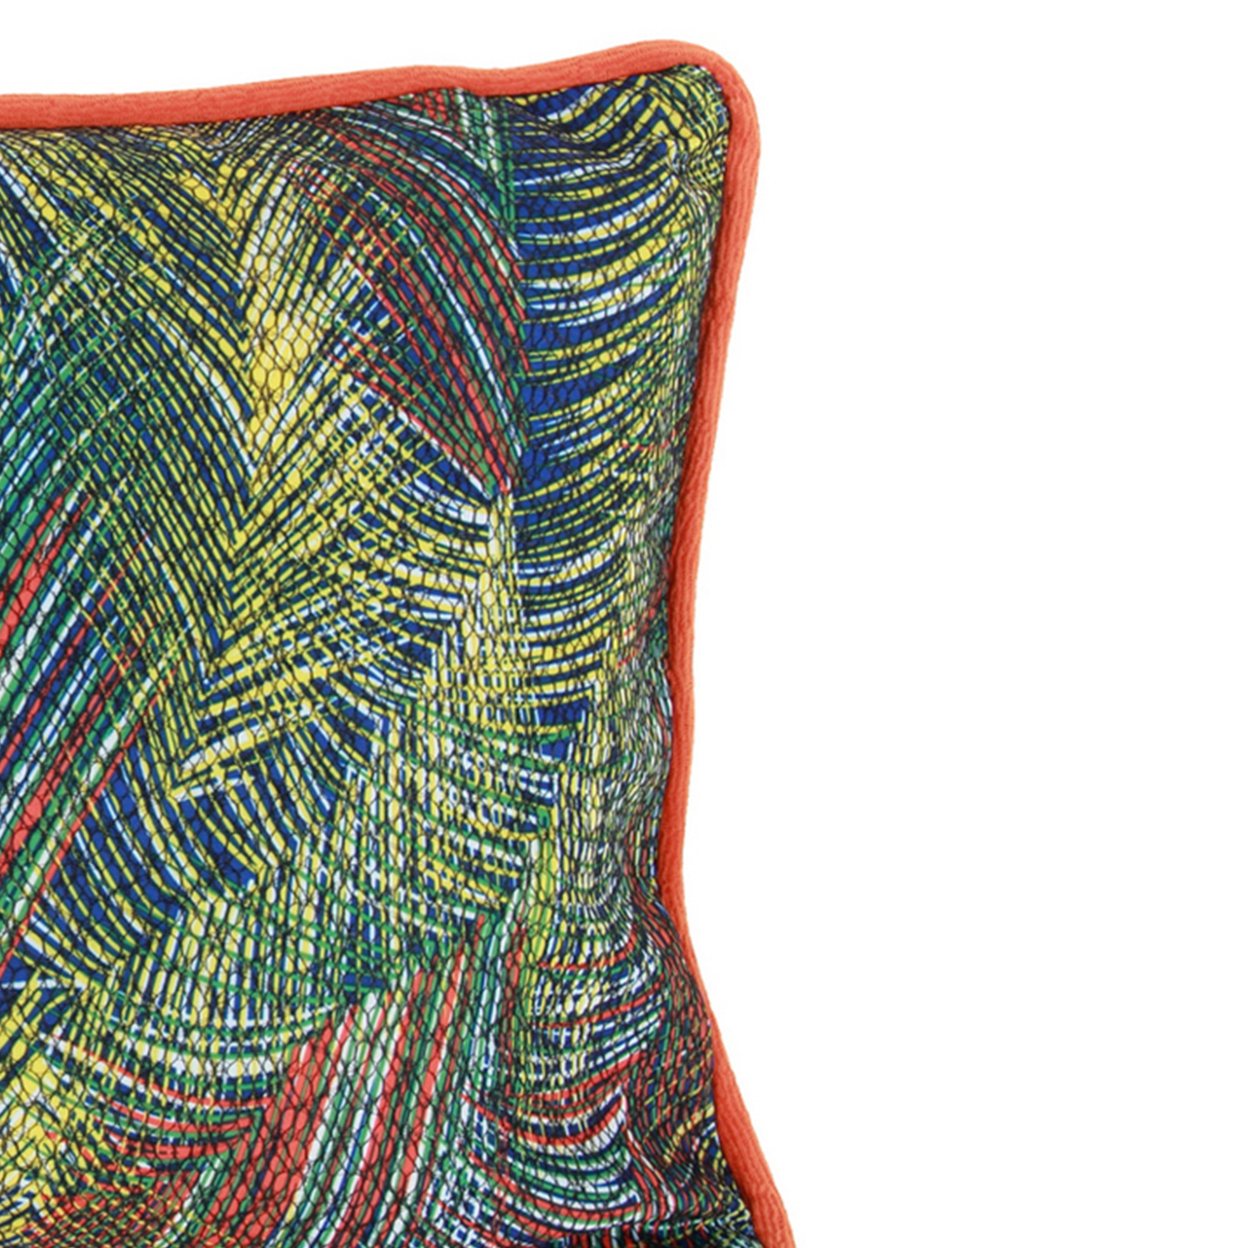 20 X 14 Inch Fabric Pillow With Abstract Art Details, Set Of 2, Multicolor- Saltoro Sherpi